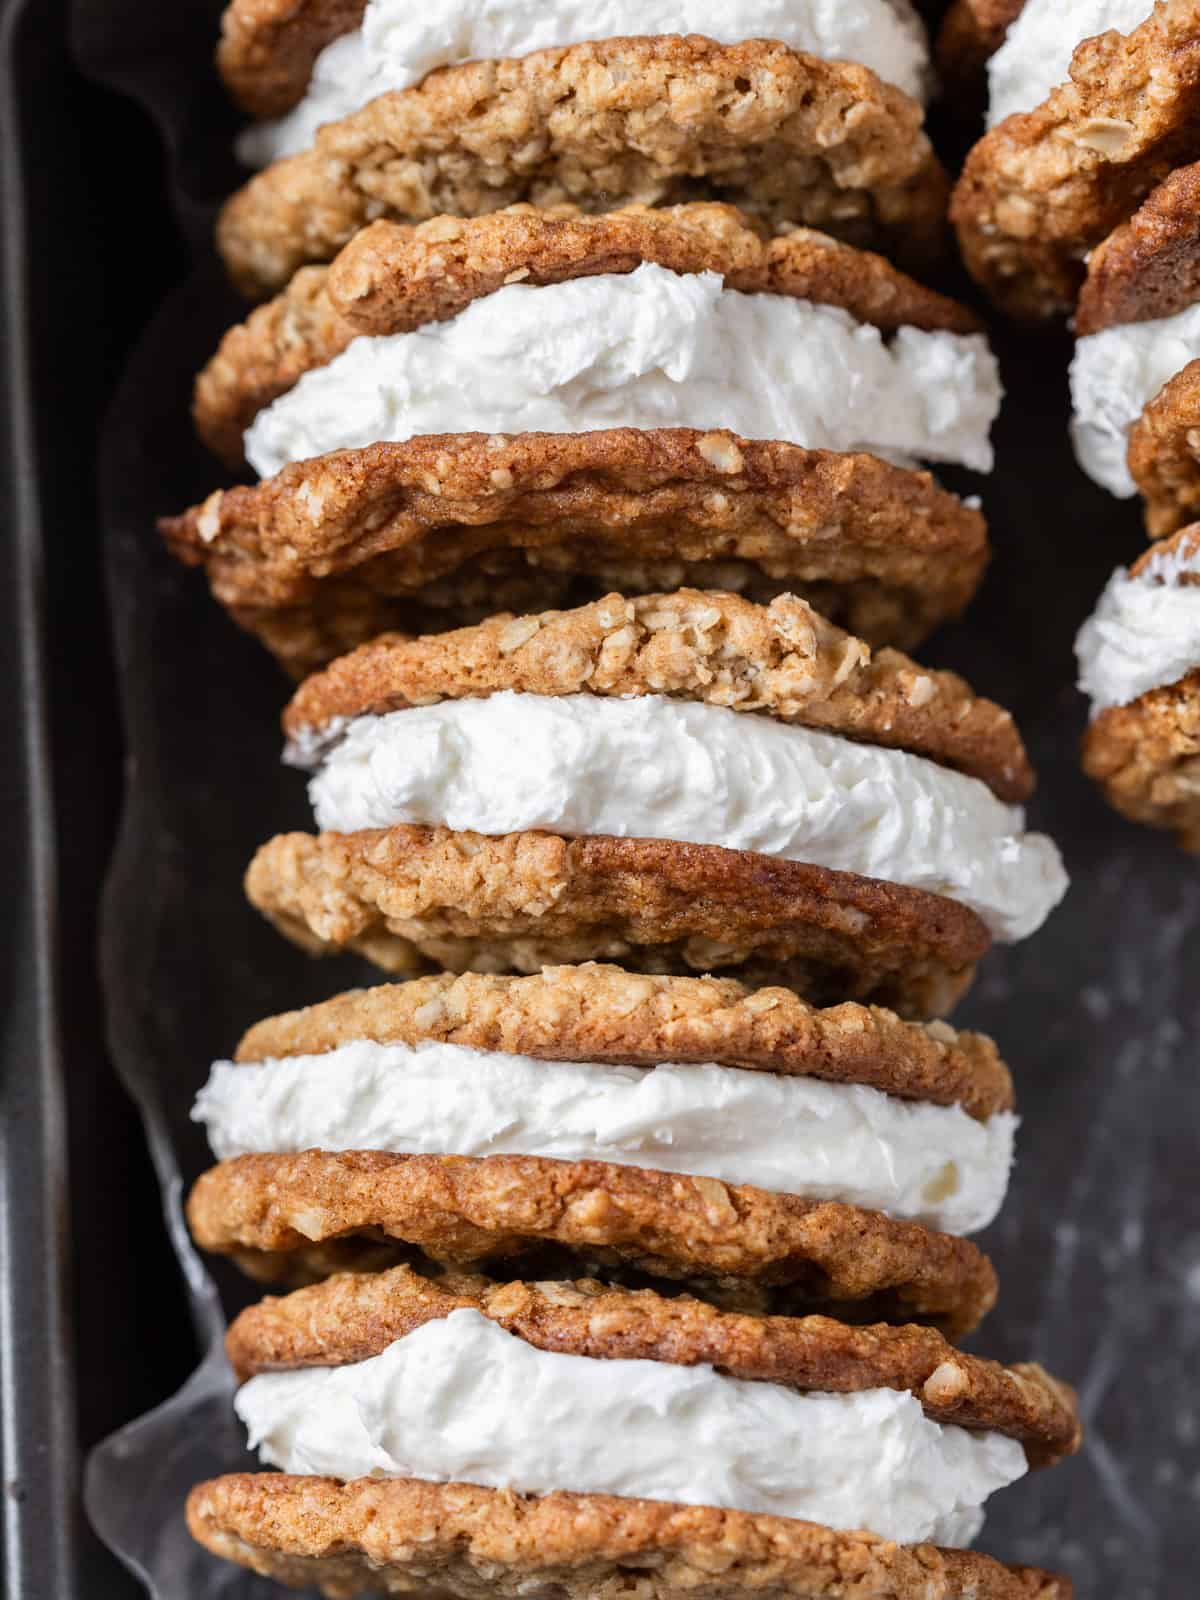 a row of oatmeal cream pies in a metal baking pan.